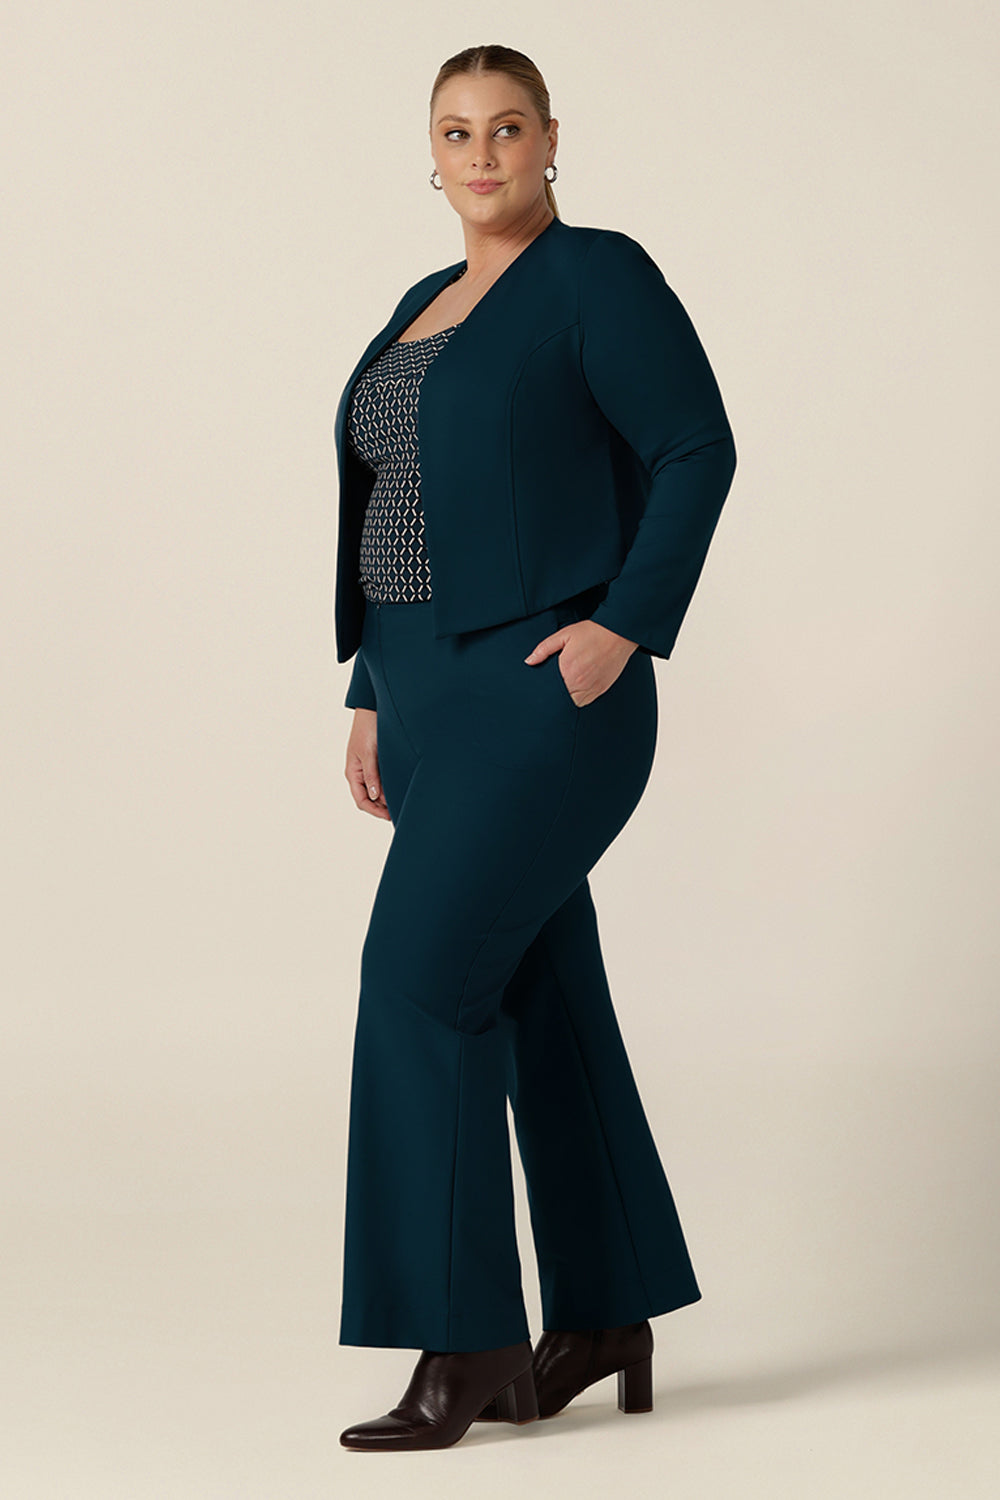 A plus size, size 18 woman wears petrol blue, tailored bootcut pants with a long sleeve printed top and tailored work jacket. Made in Australia in ponte fabric, these comfortable work pants are great for curvy women - shop in sizes 8 to 24.